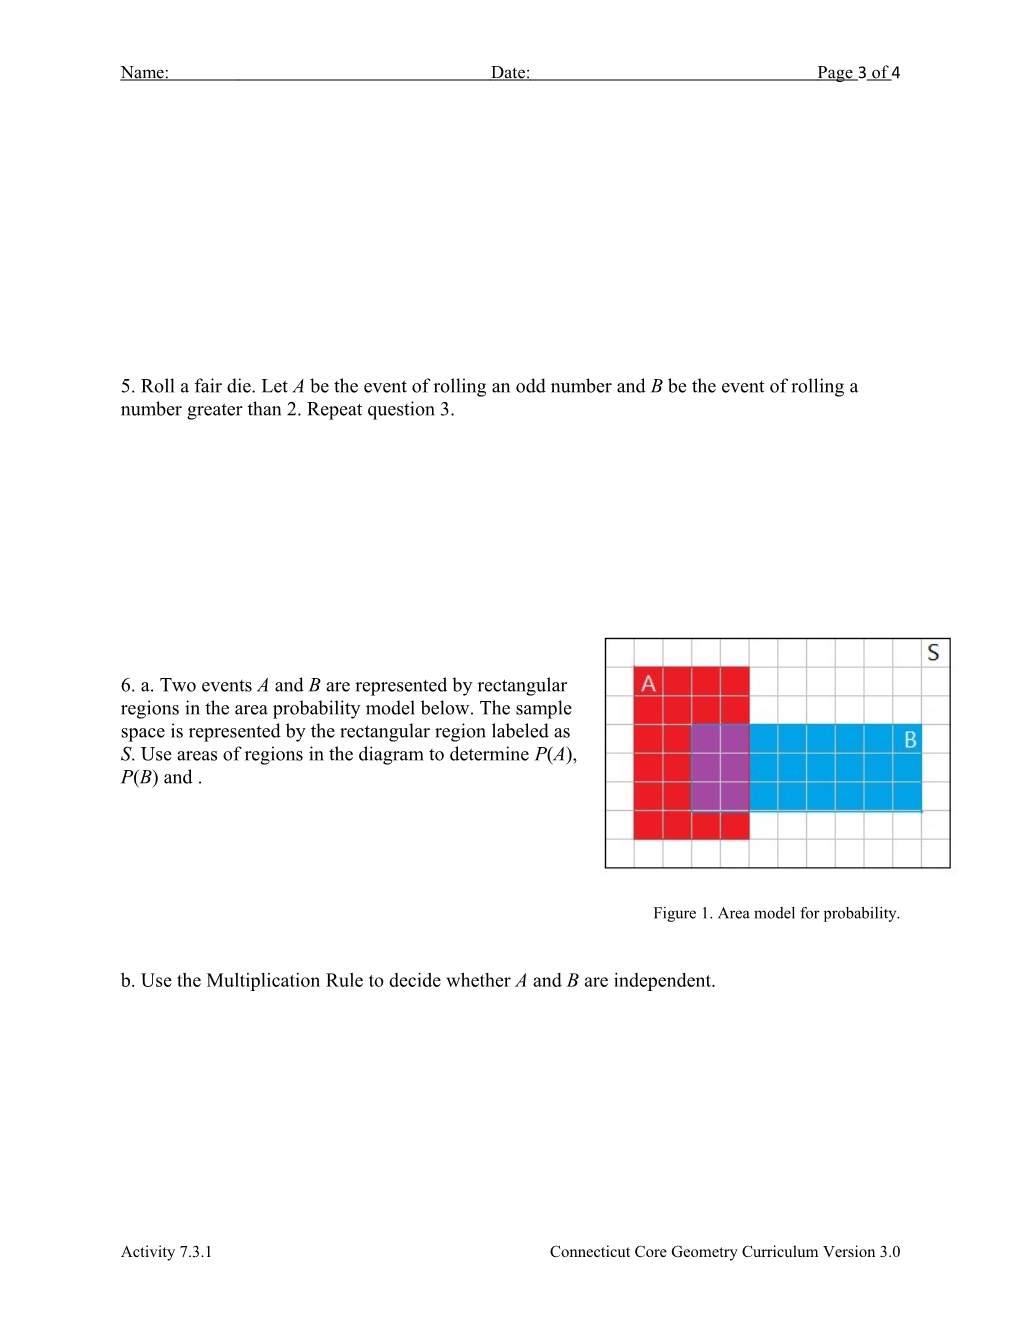 Activity 7.3.1: Independence and the Multiplication Rule